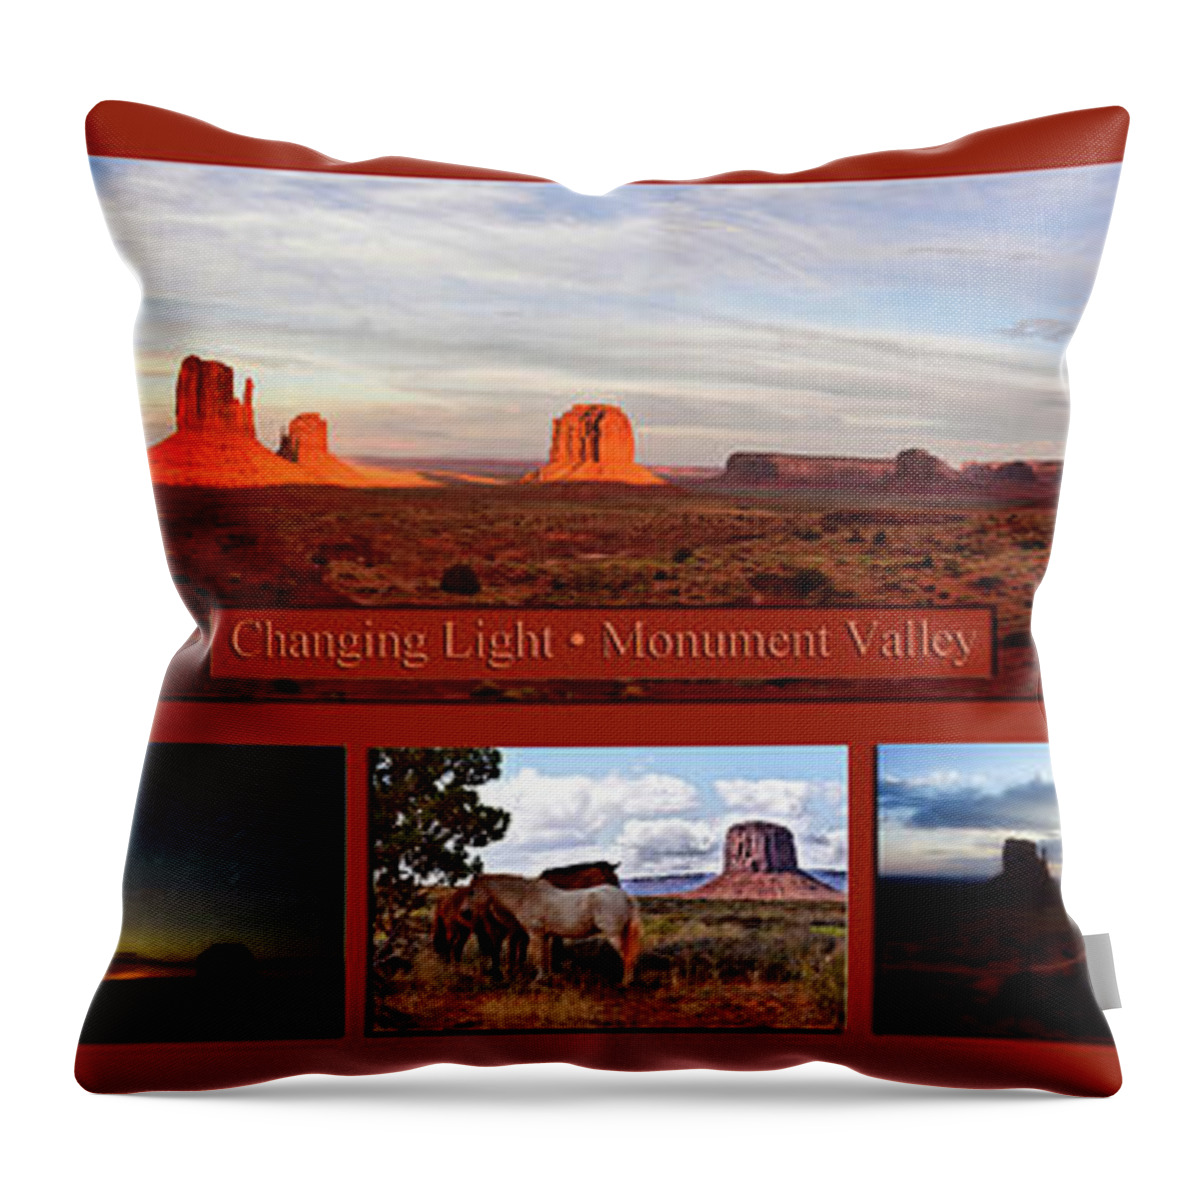 Monument Valley Throw Pillow featuring the photograph Monument Valley Changing Light Panorama Collage by Thomas Woolworth